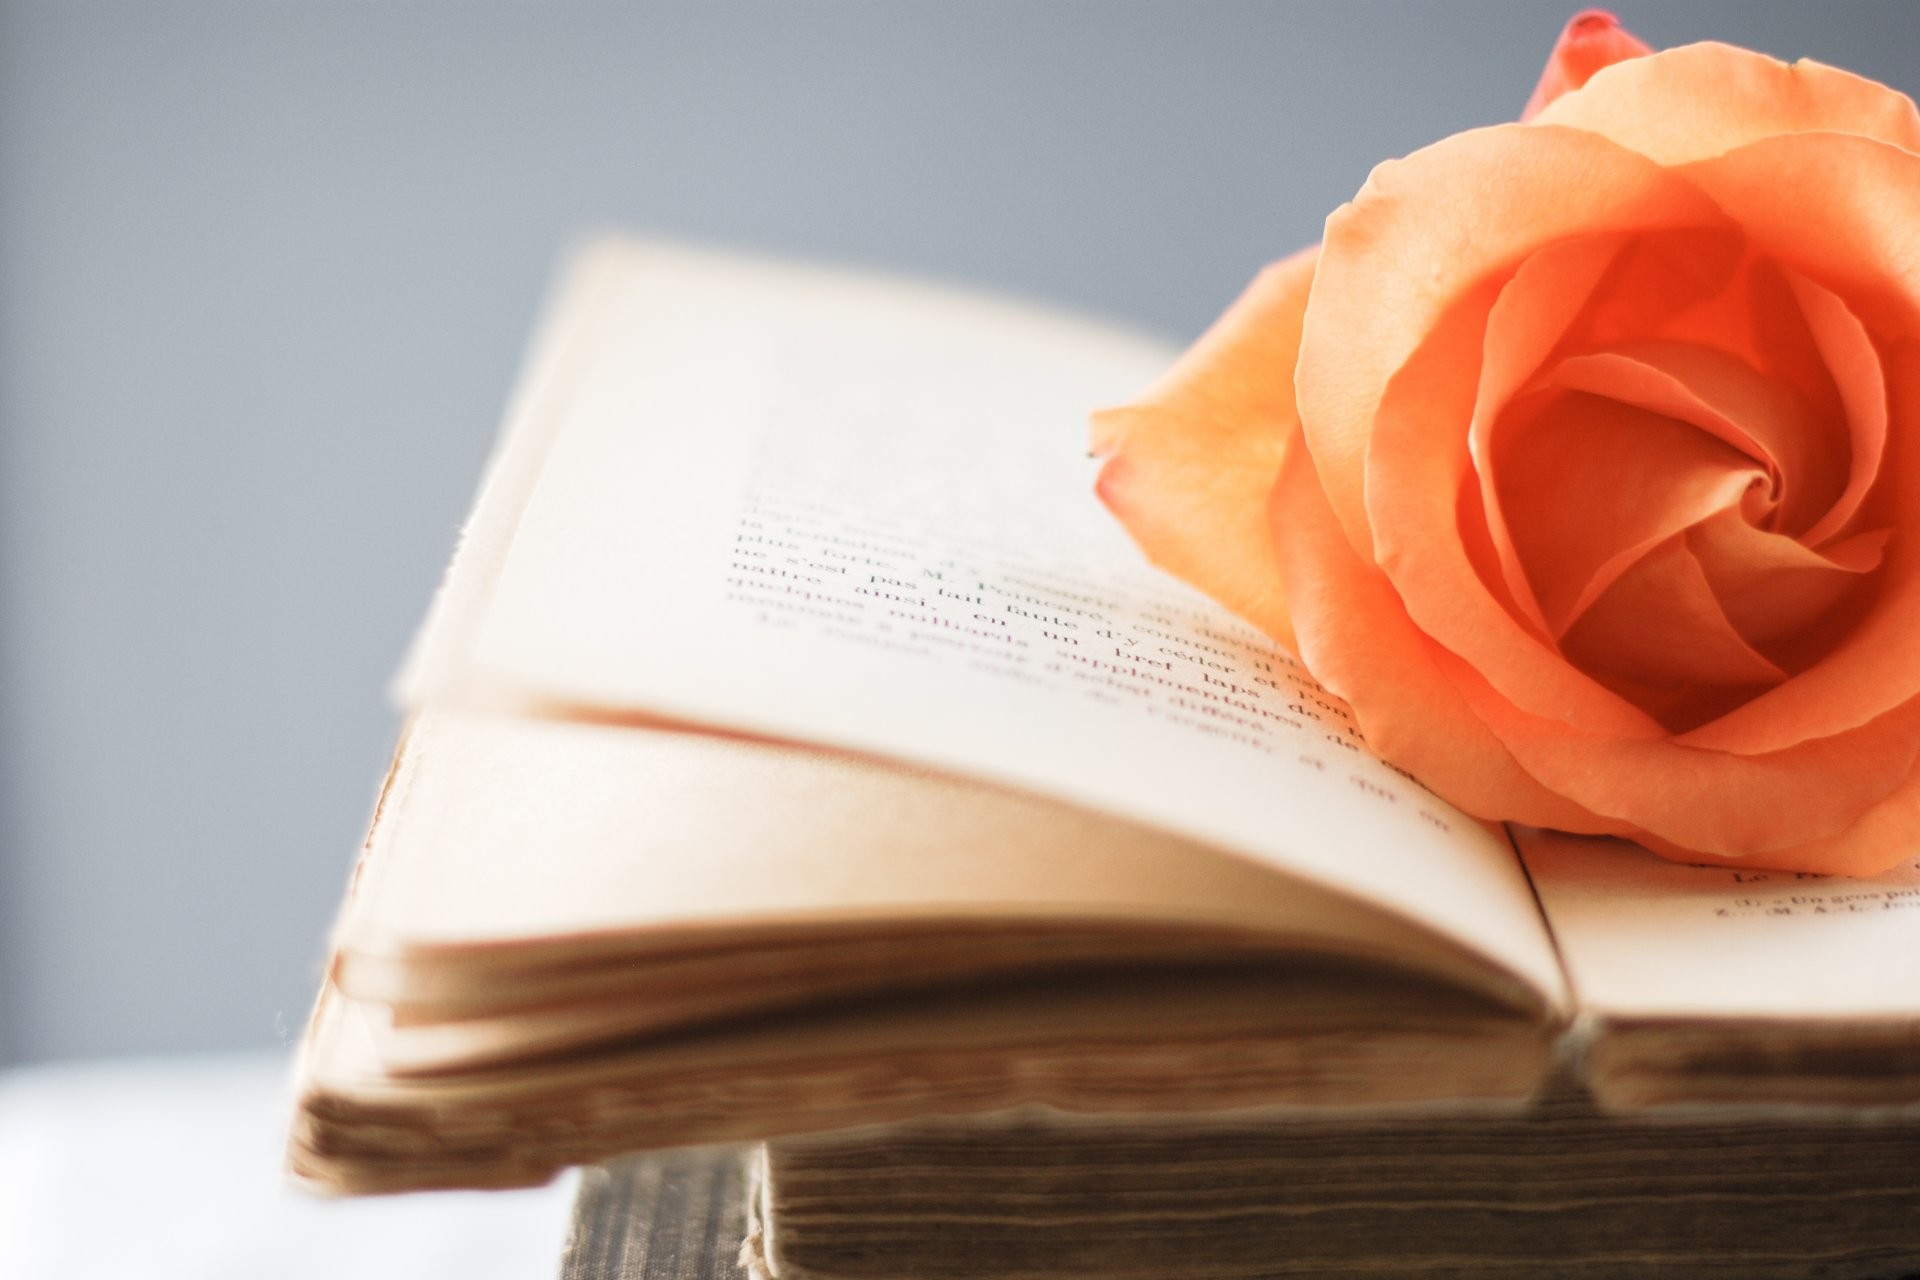 1920x1280 Orange Rose on Book Pages Wallpaper 49792